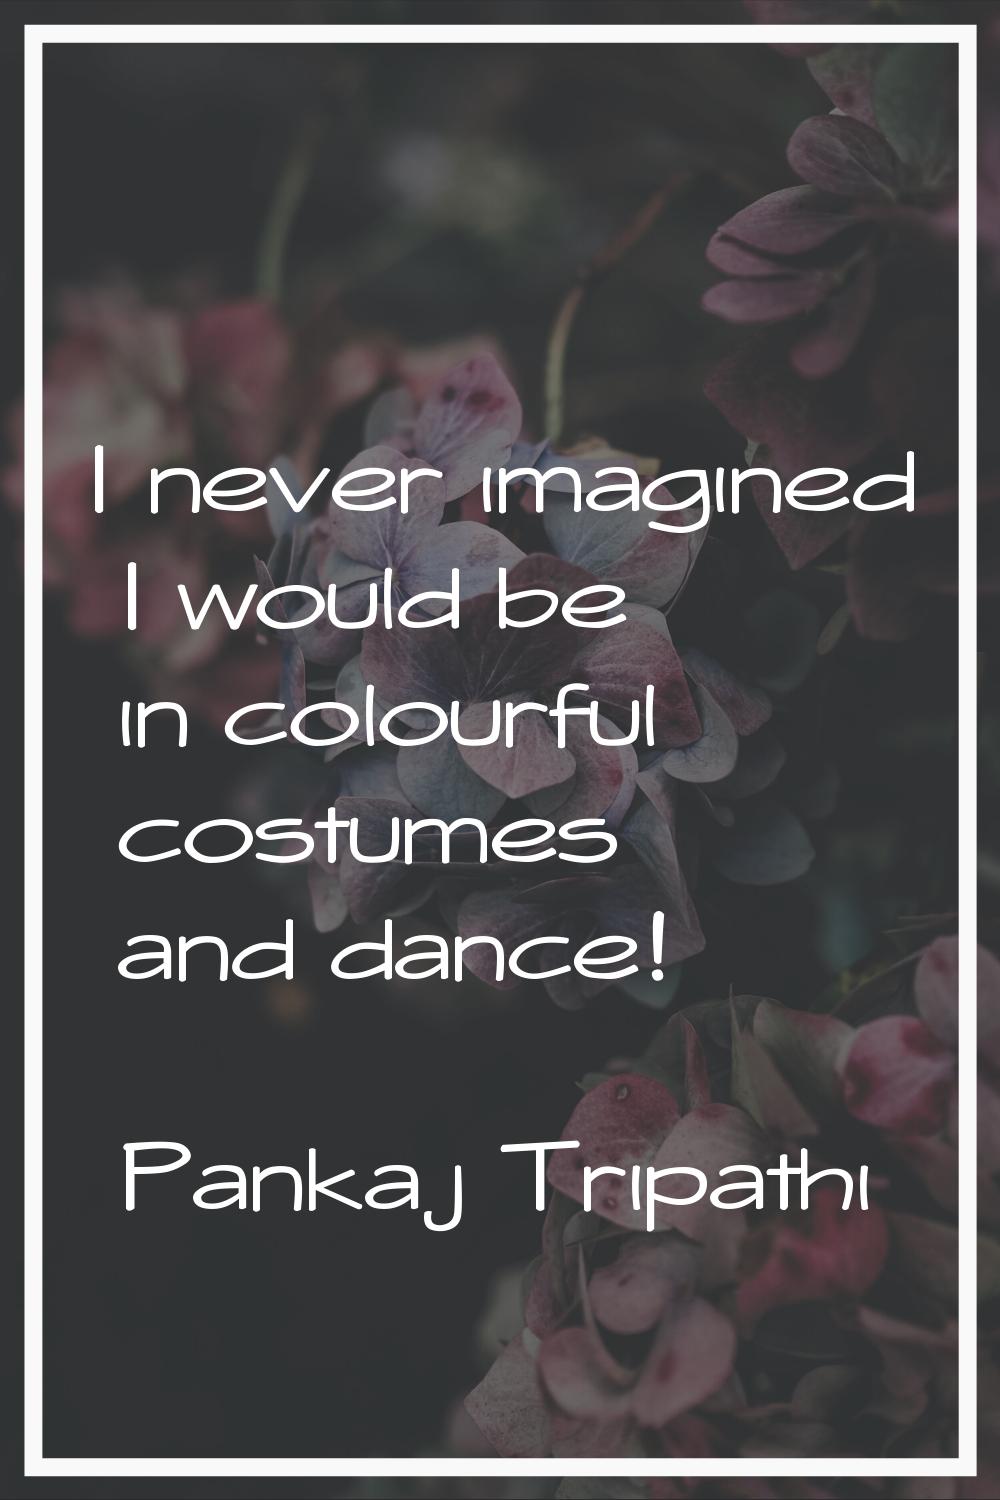 I never imagined I would be in colourful costumes and dance!